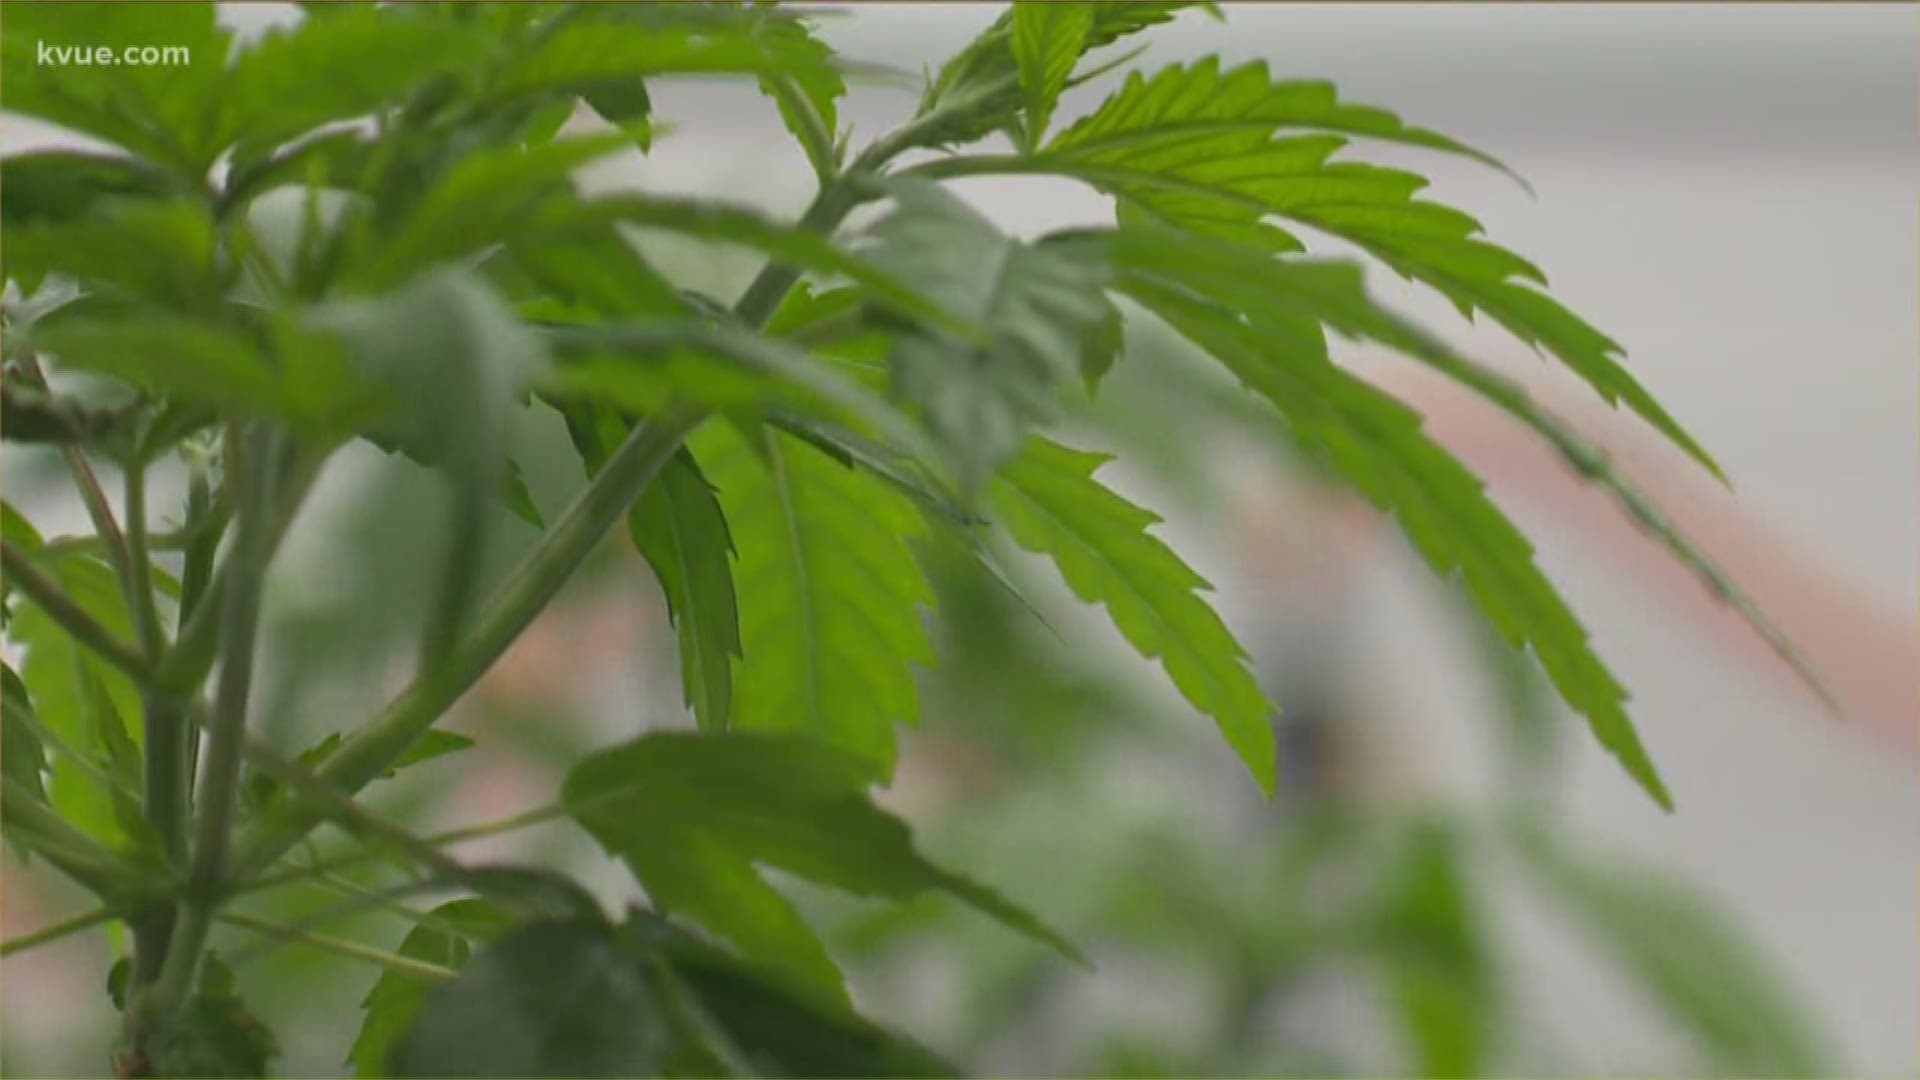 Gov. Greg Abbott signed a bill Monday allowing it, but this doesn't mean people can start growing hemp right away.